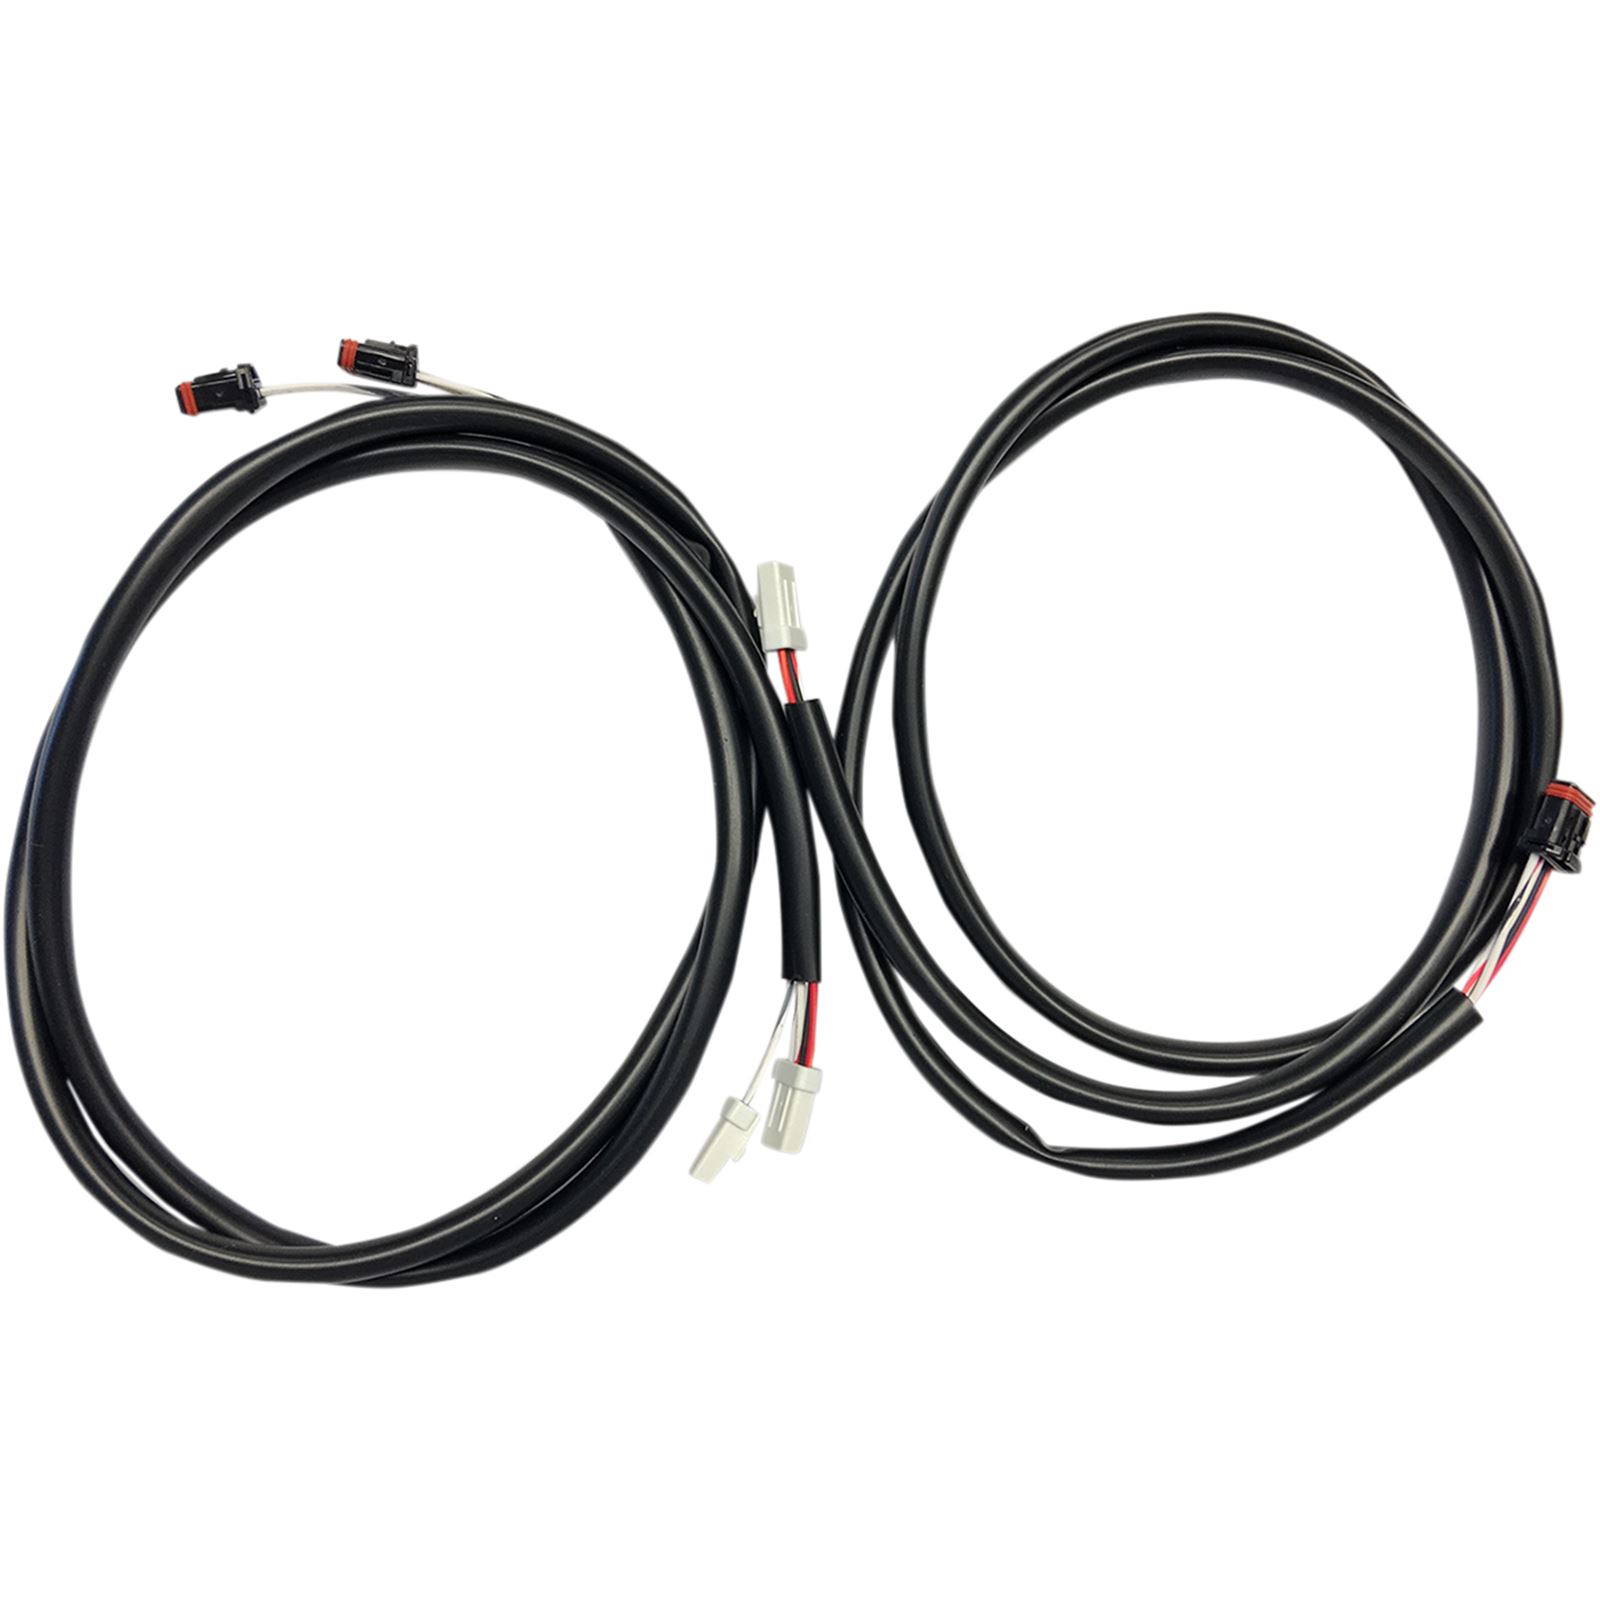 LA Choppers Can-Bus Wiring Harness Extension - 42"